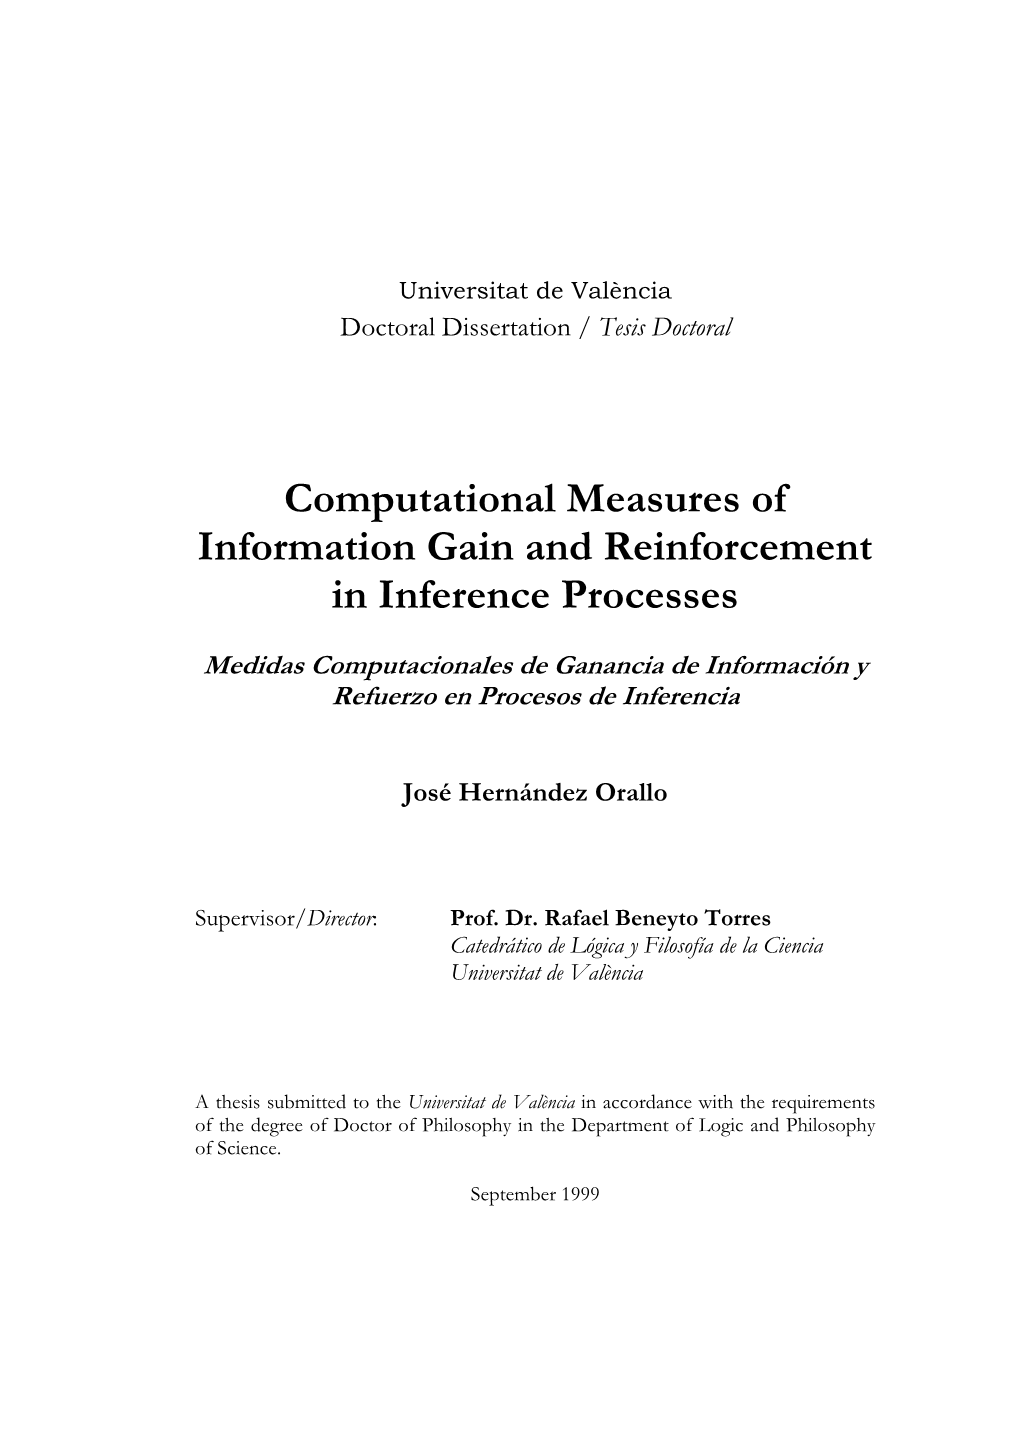 Computational Measures of Information Gain and Reinforcement in Inference Processes